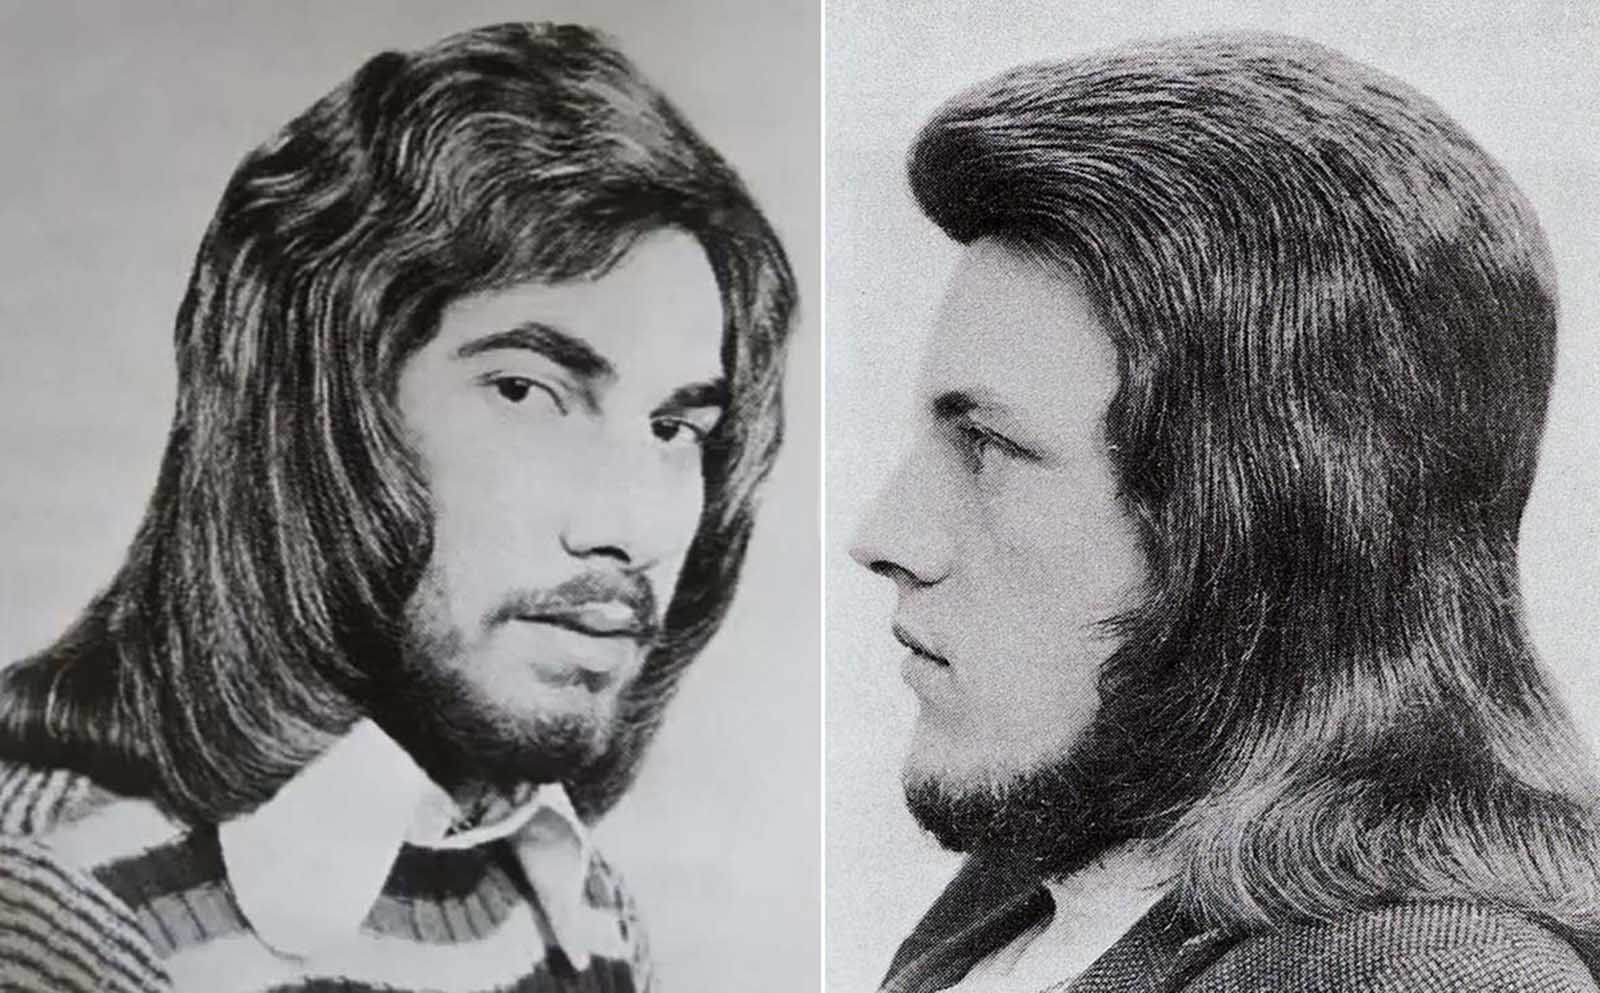 Romantic men's hairstyle from the 1960s–1970s - Rare Historical Photos